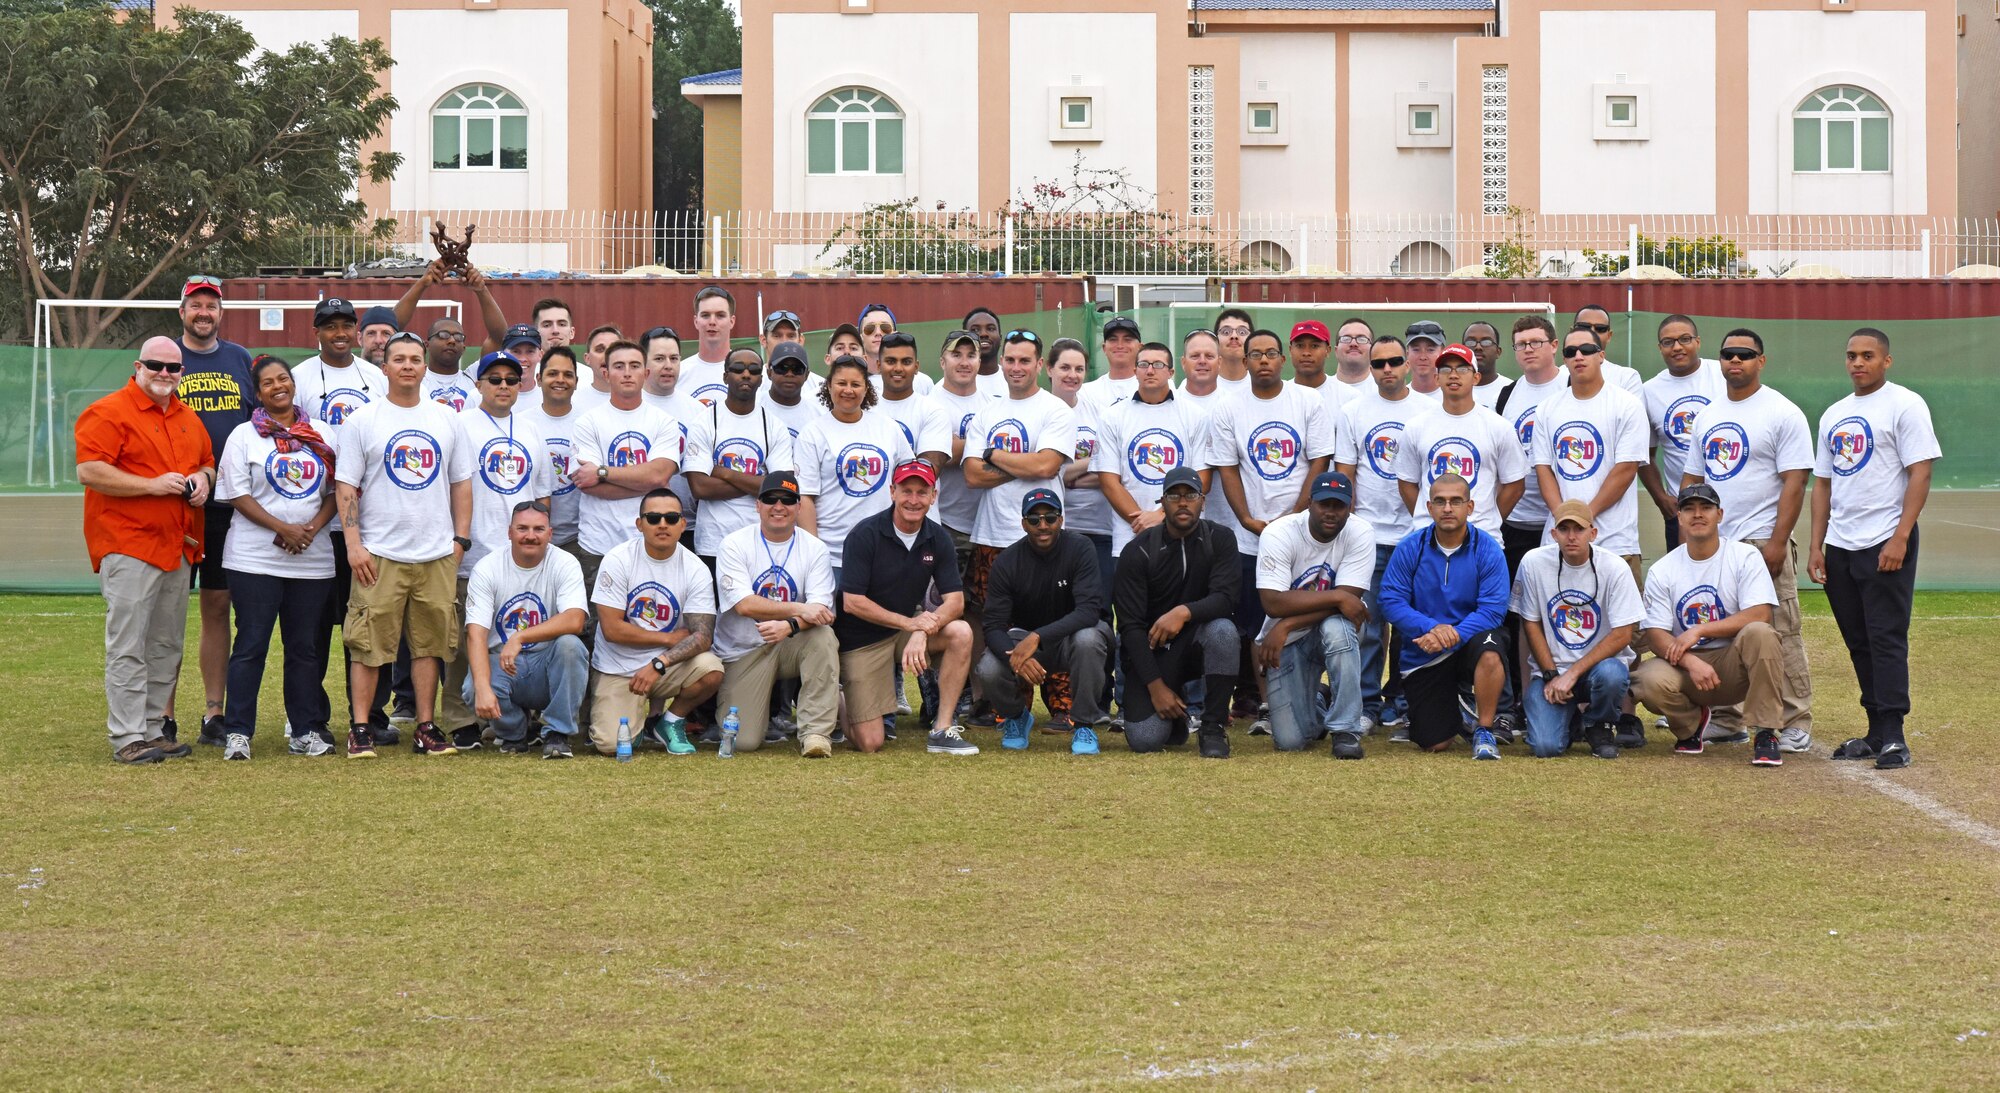 U.S. Airmen from Al Udeid Air Base, Qatar, pose for a photo at the American School of Doha, Feb. 24, 2017. Airmen volunteered to help set up, organize and run games, as well as provide adult supervision during the annual ASD 2017 Friendship Festival. (U.S. Air Force photo by Senior Airman Cynthia A. Innocenti)